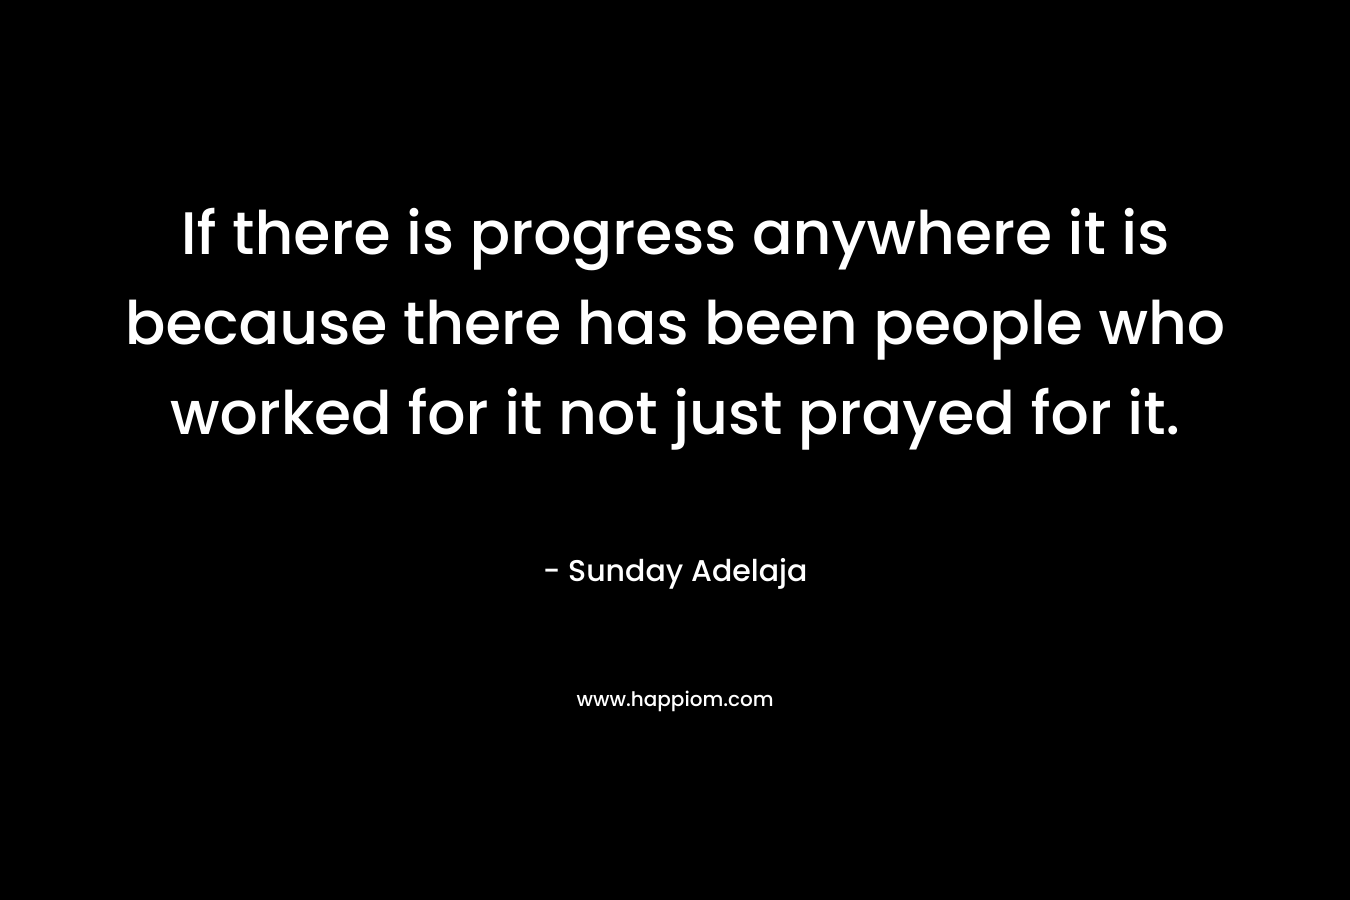 If there is progress anywhere it is because there has been people who worked for it not just prayed for it. – Sunday Adelaja